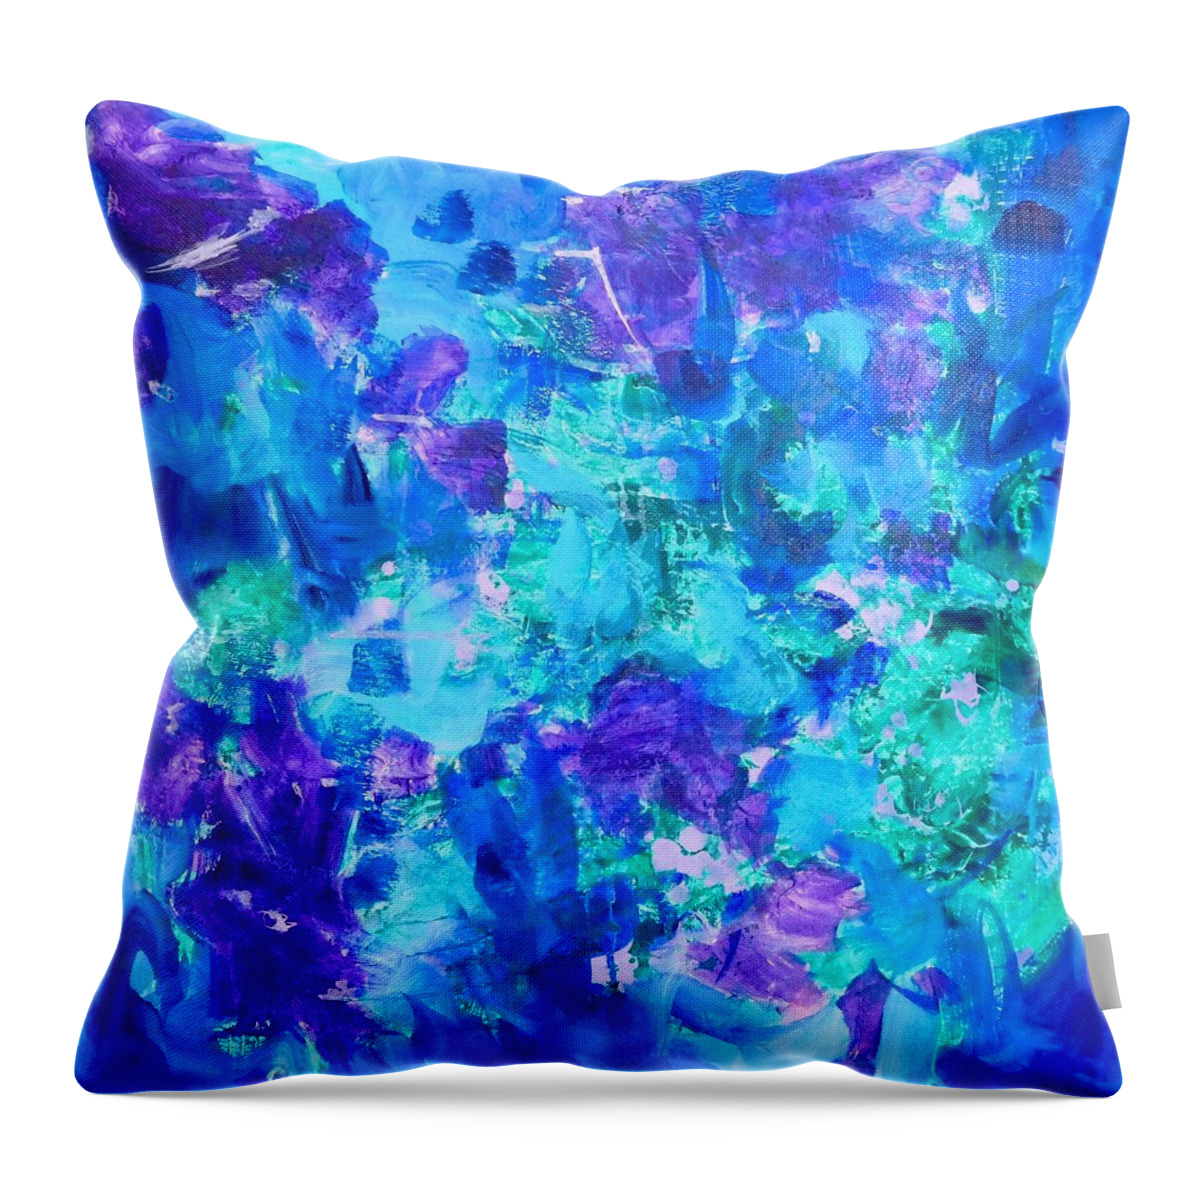 Emergence Throw Pillow featuring the painting Emergence by Irene Hurdle